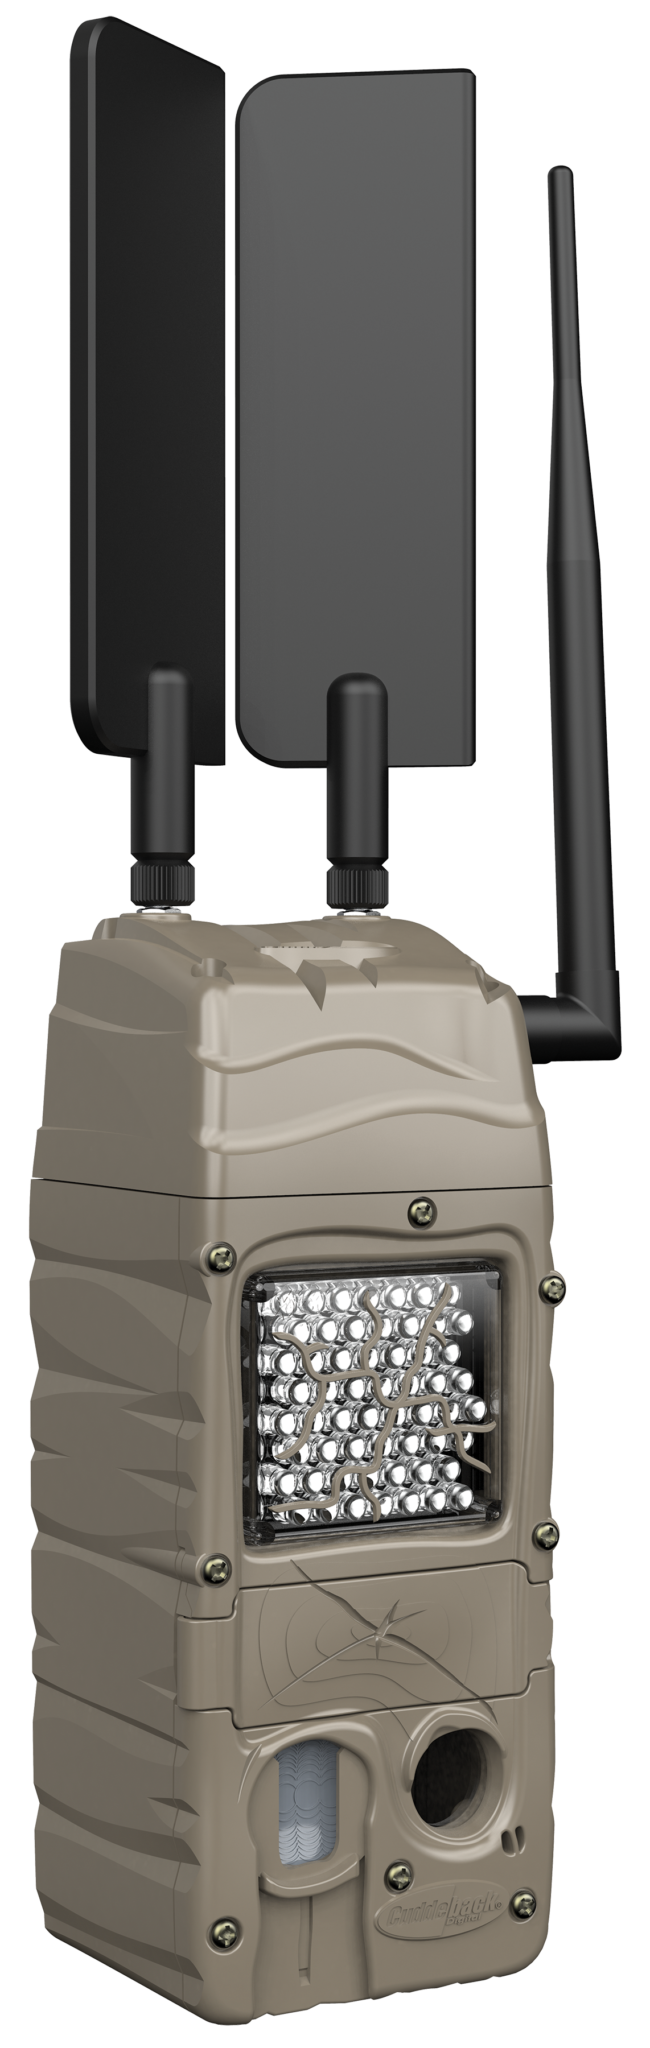 New and Improved G Series CuddeLink Cell Camera from Cuddeback Deer